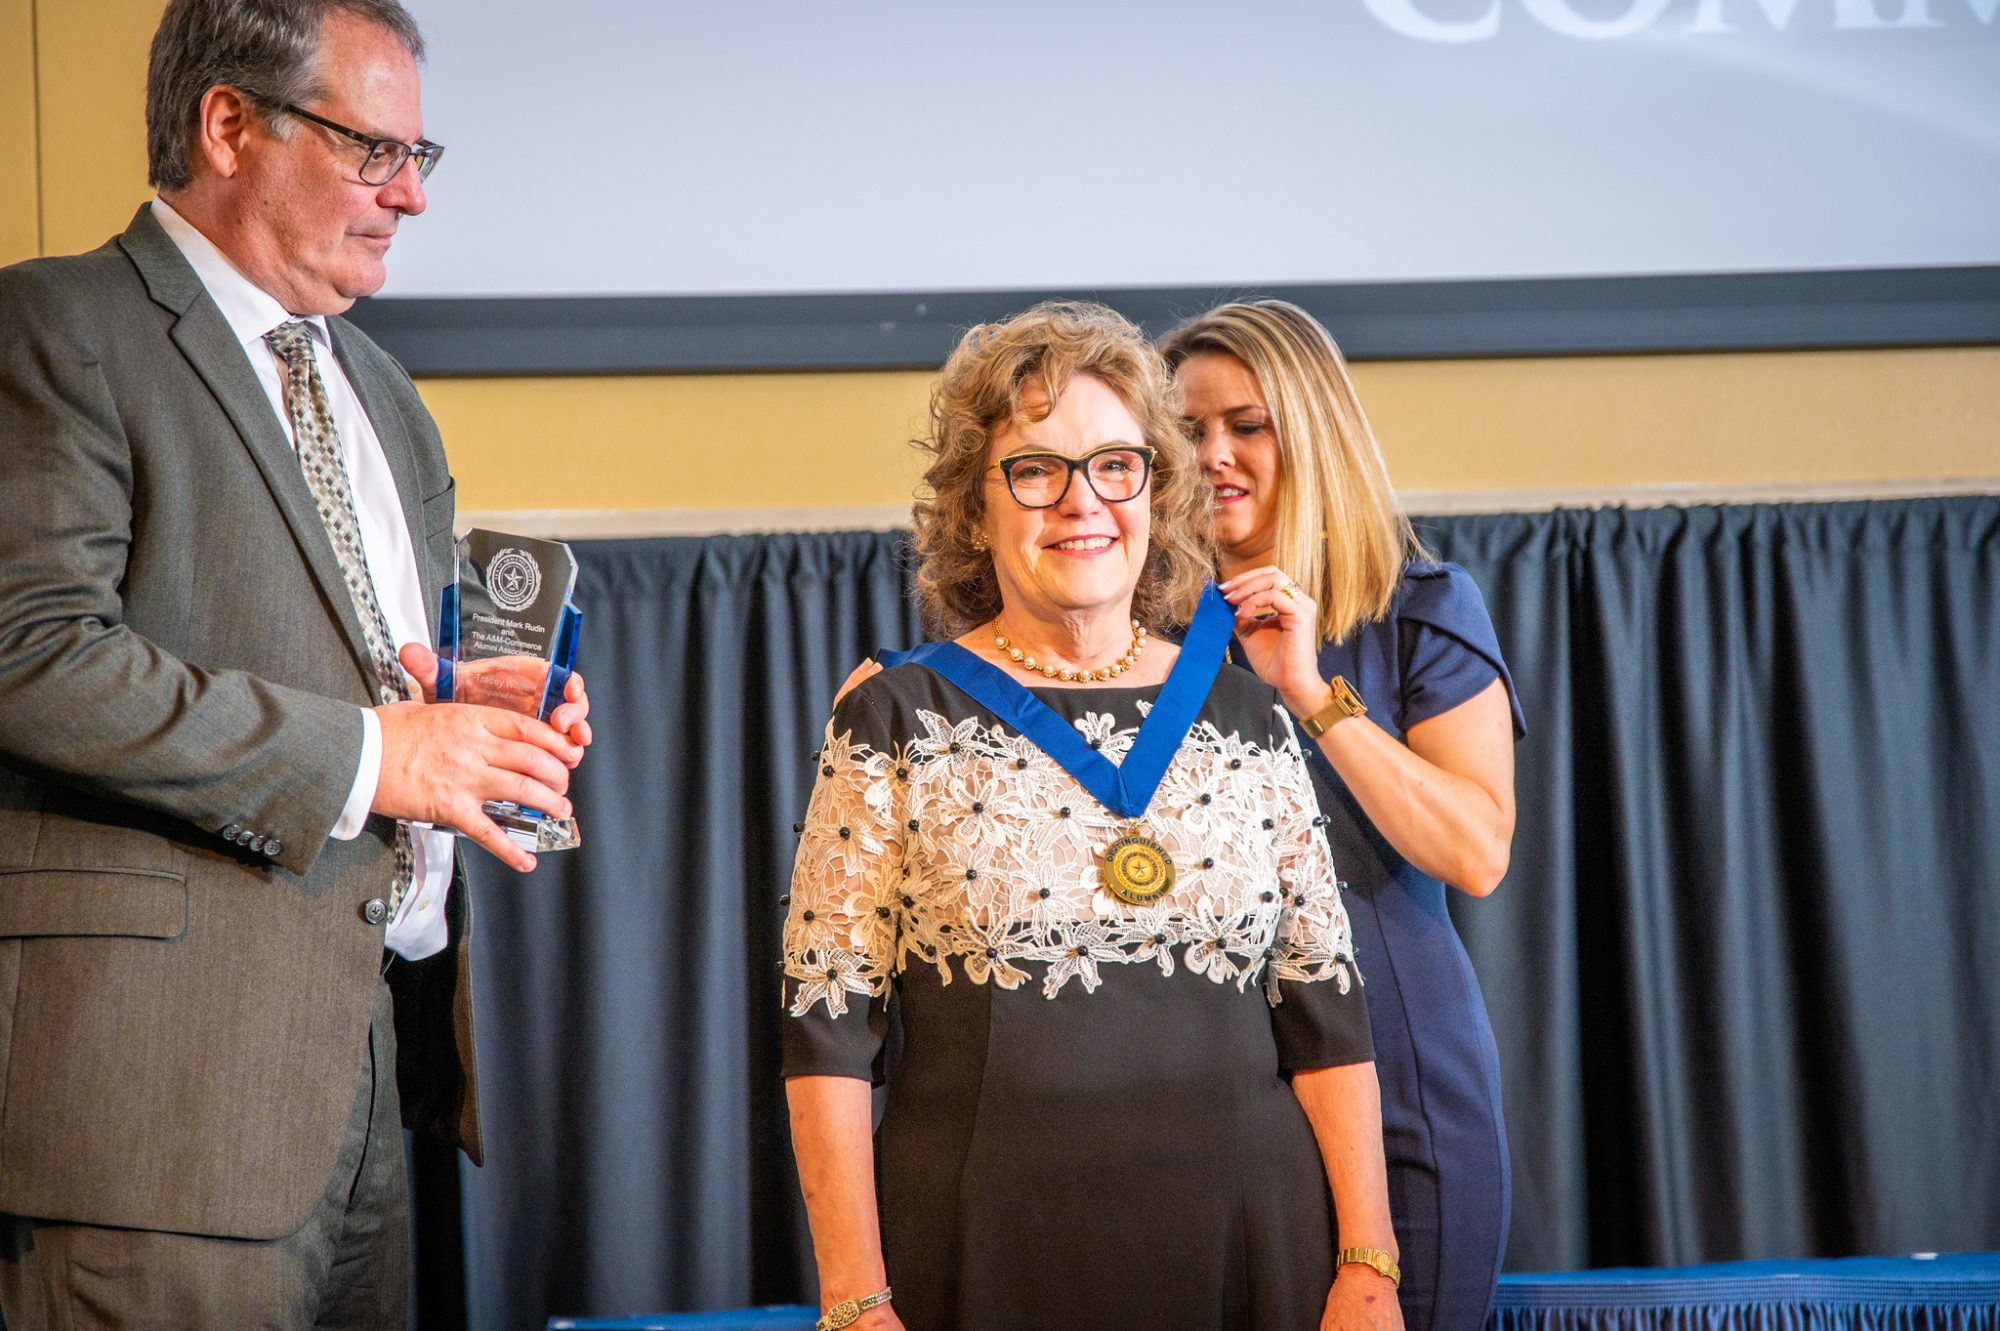 Awardee allows a medallion to be fastened around her neck, with presenters on either side of her.